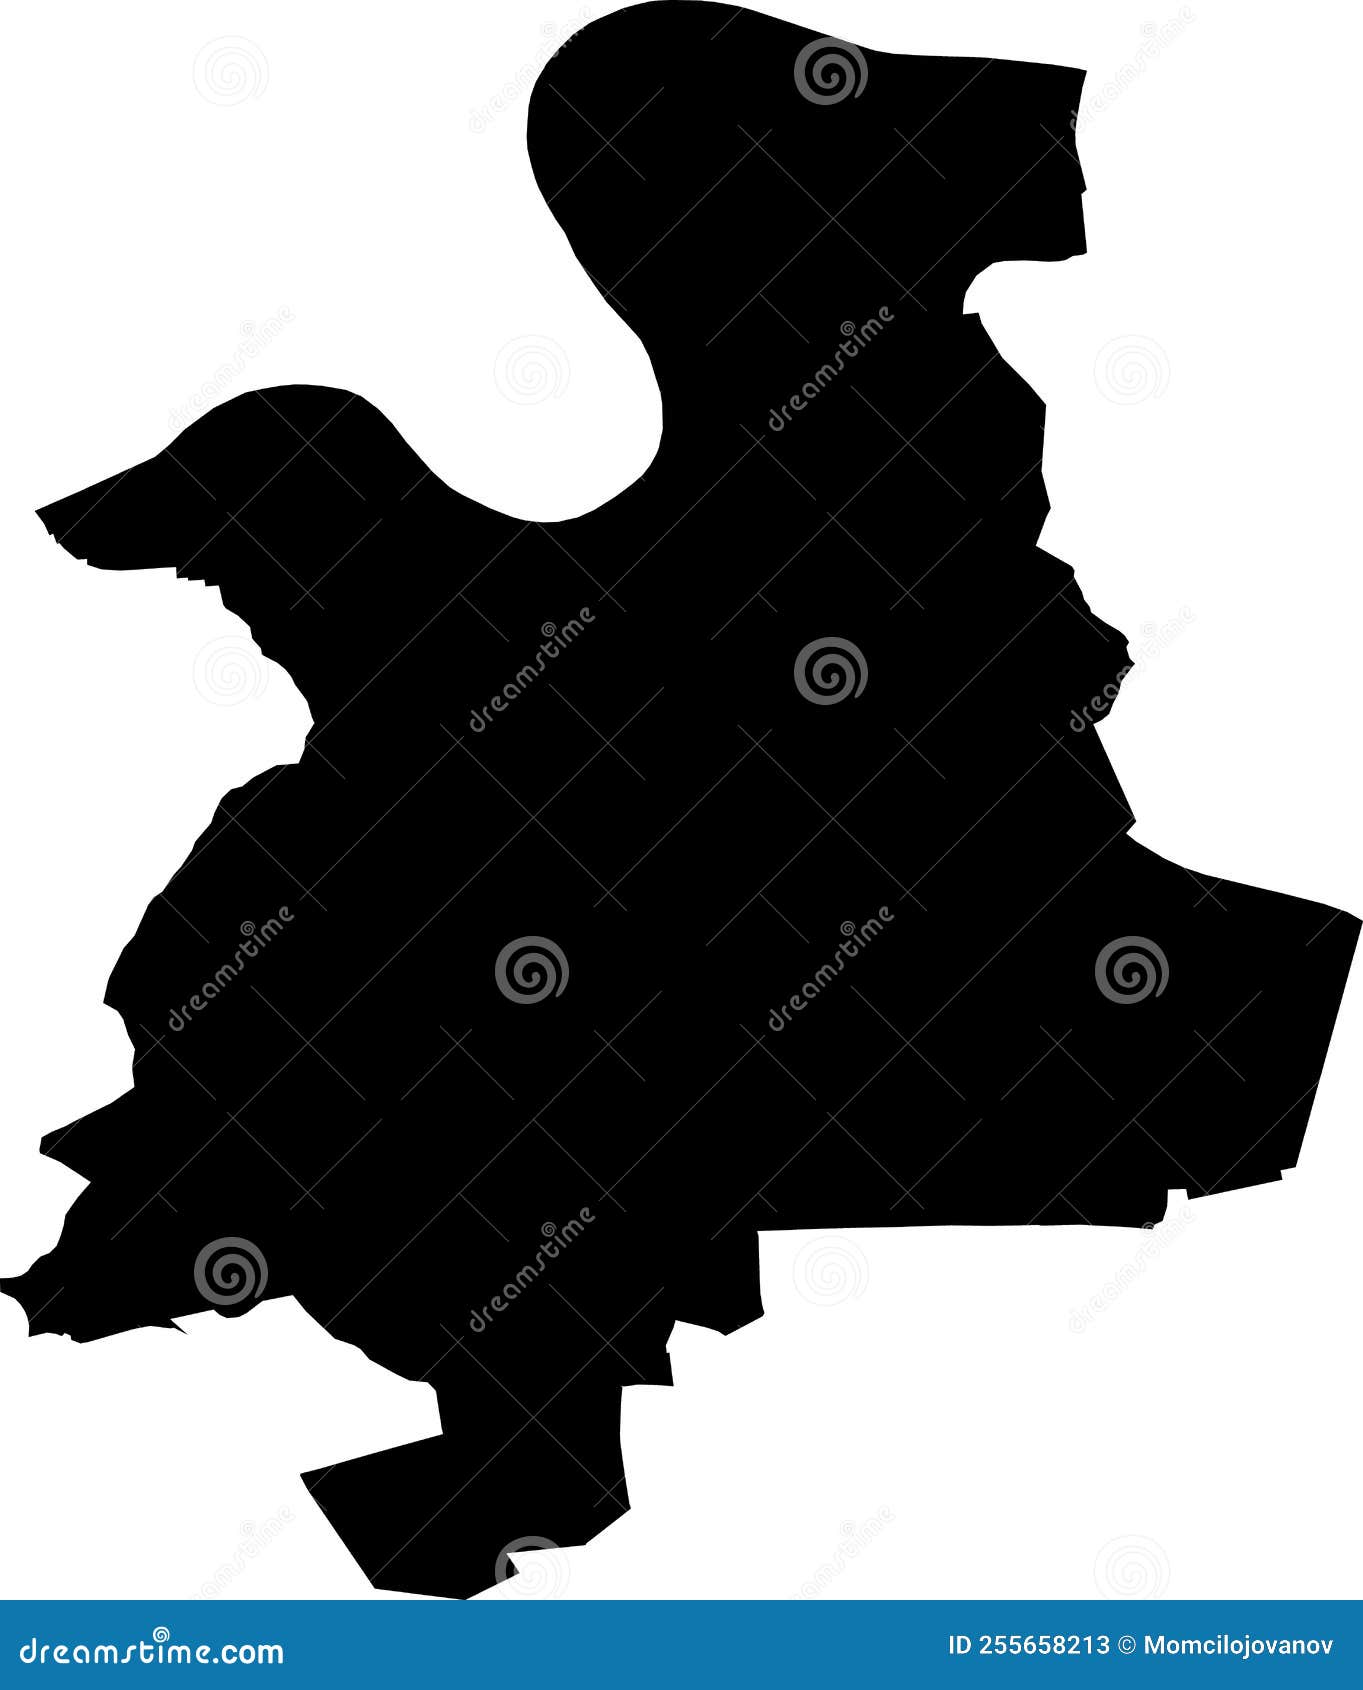 black map of offenbach am main, germany